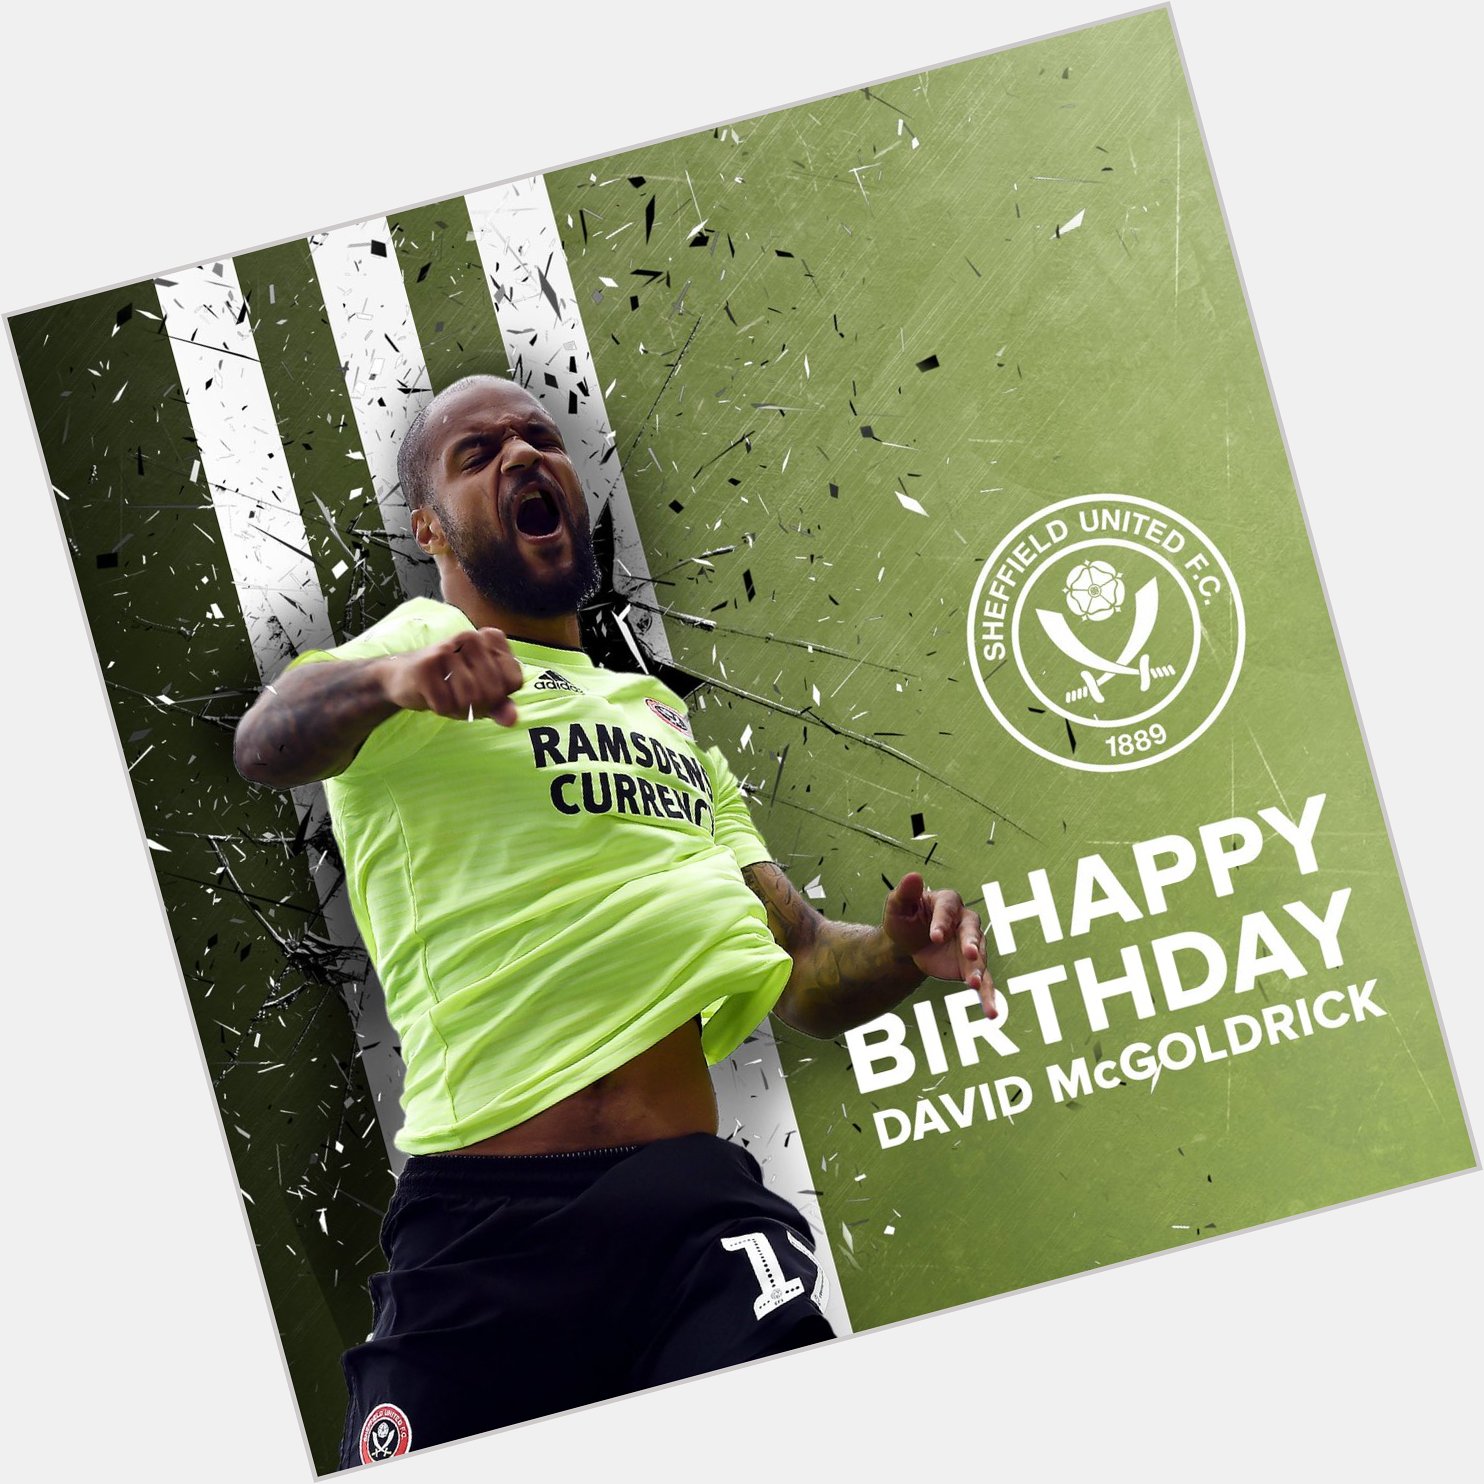   Happy Birthday David McGoldrick  We hope you have a great day     